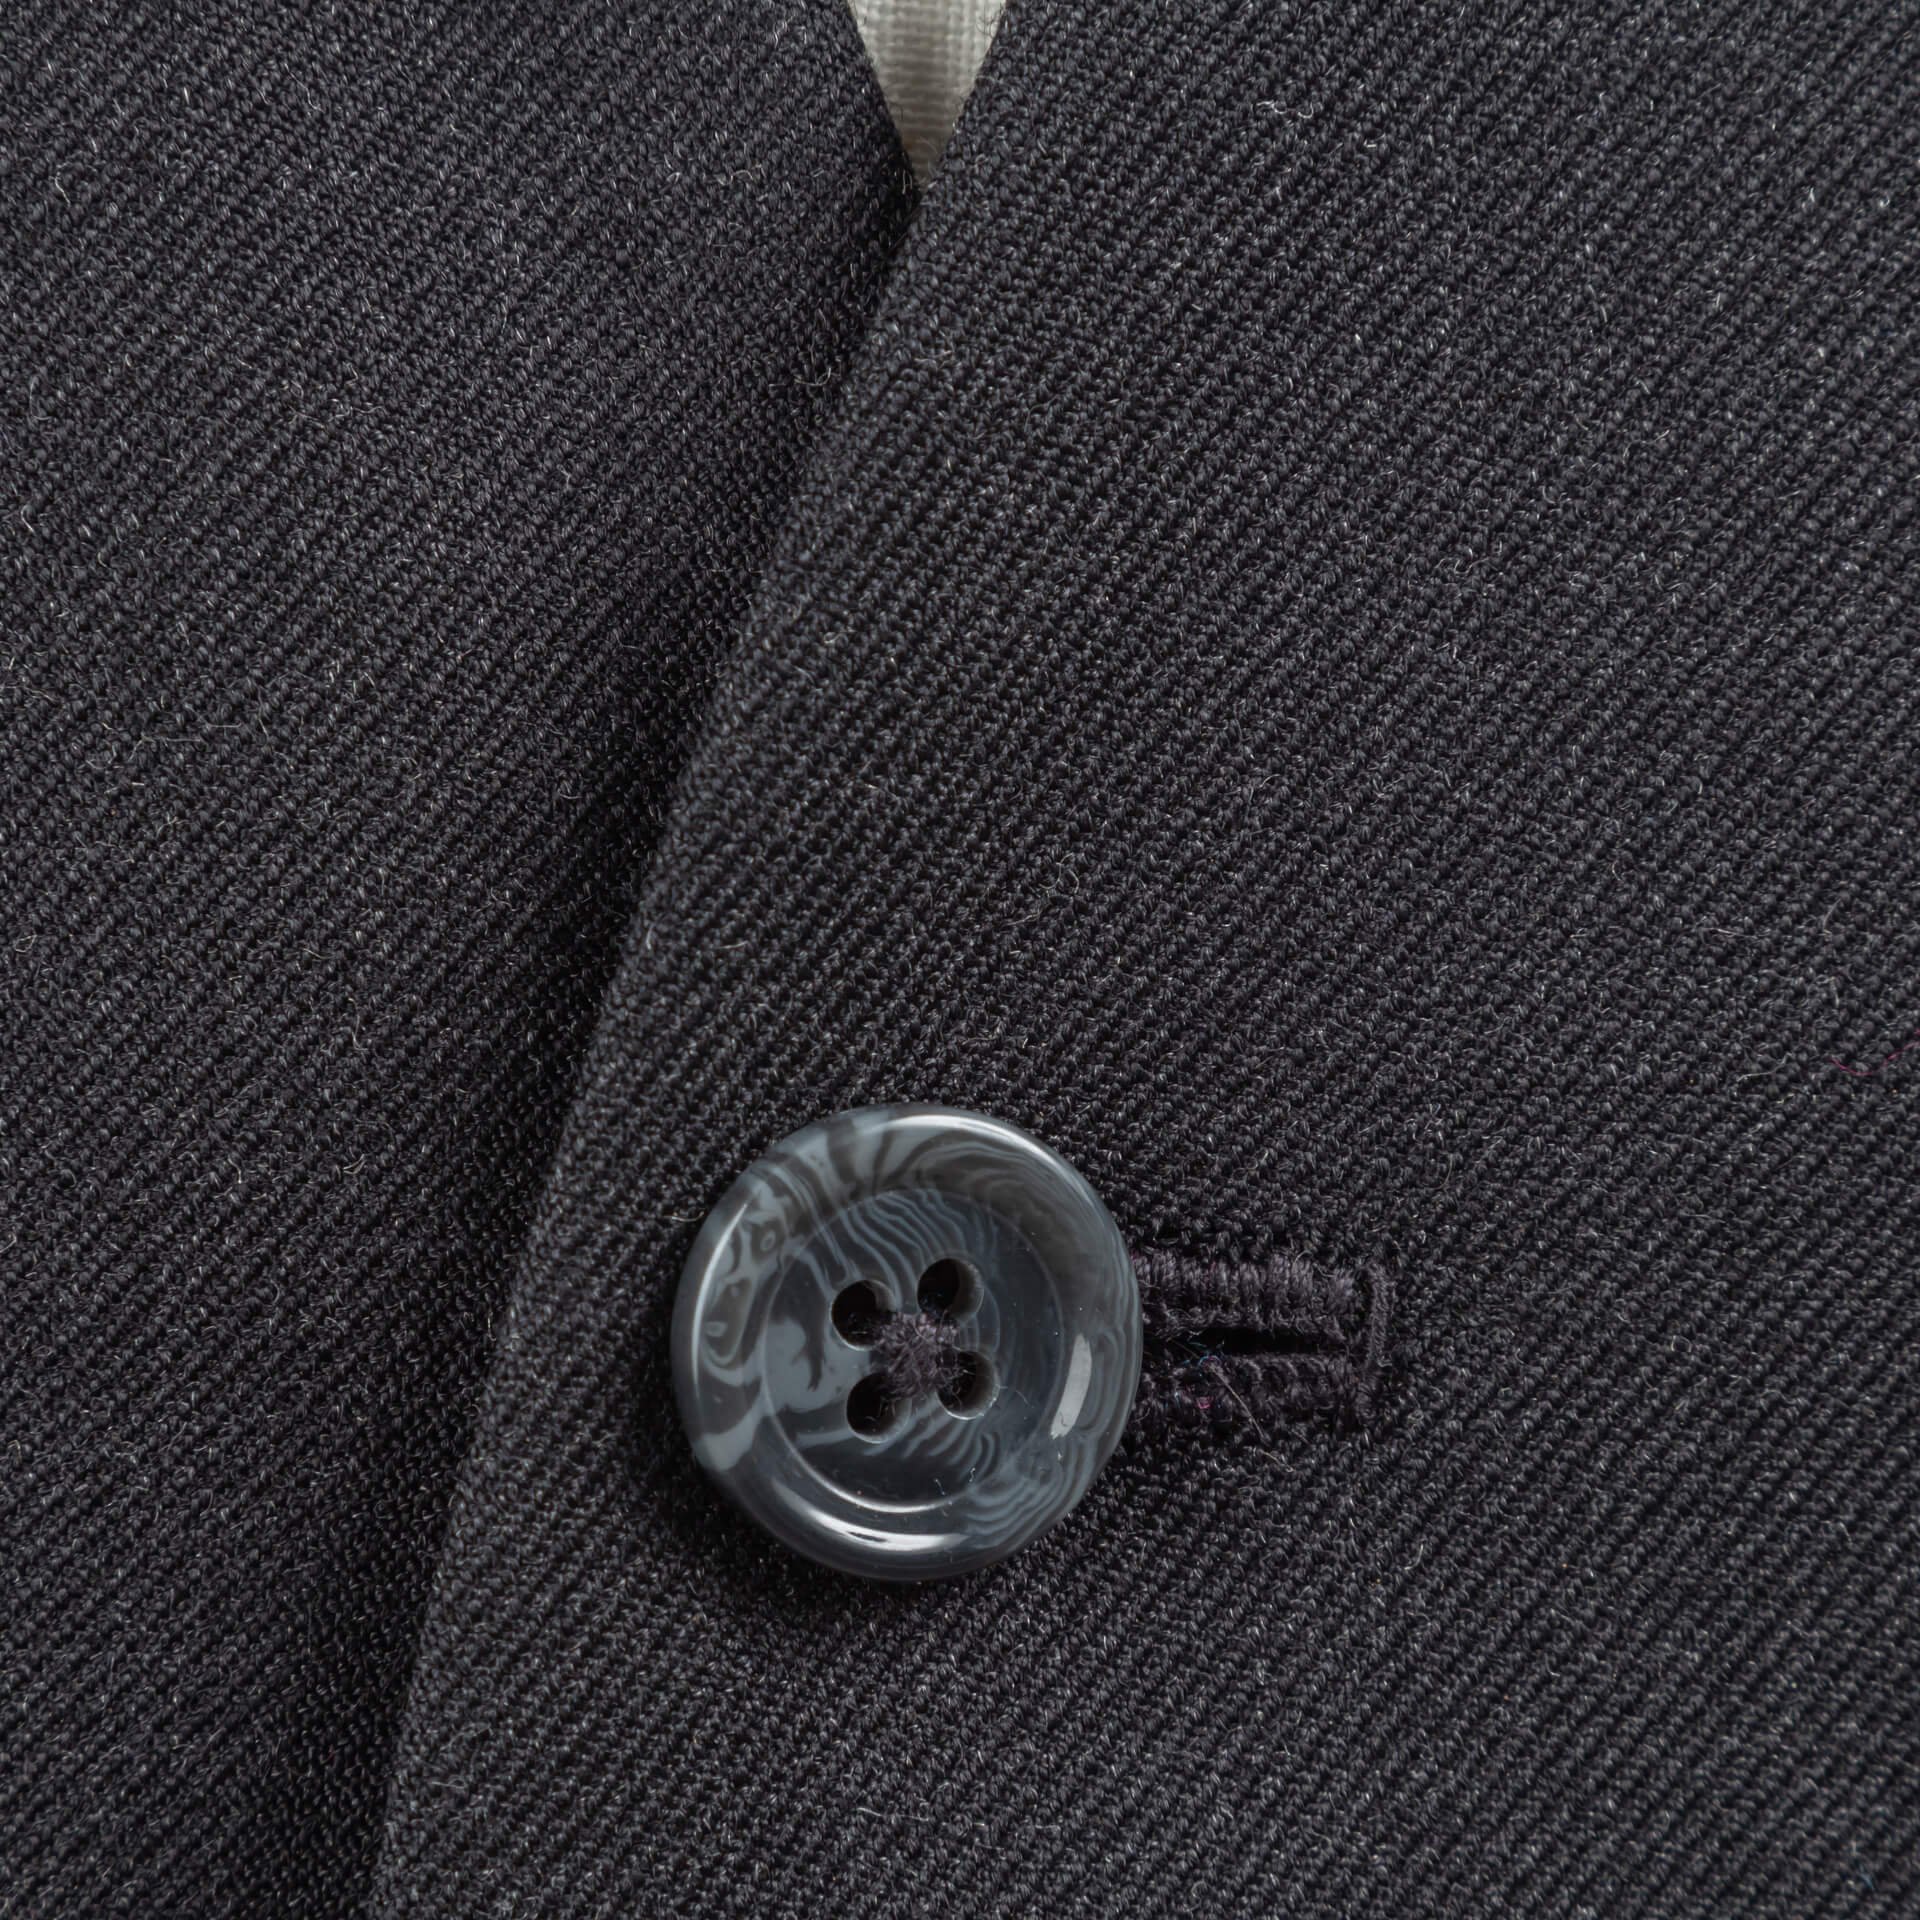 Bespoke Suit Charcoal — Bespoke Tailor for Custom Suits & Shirts.